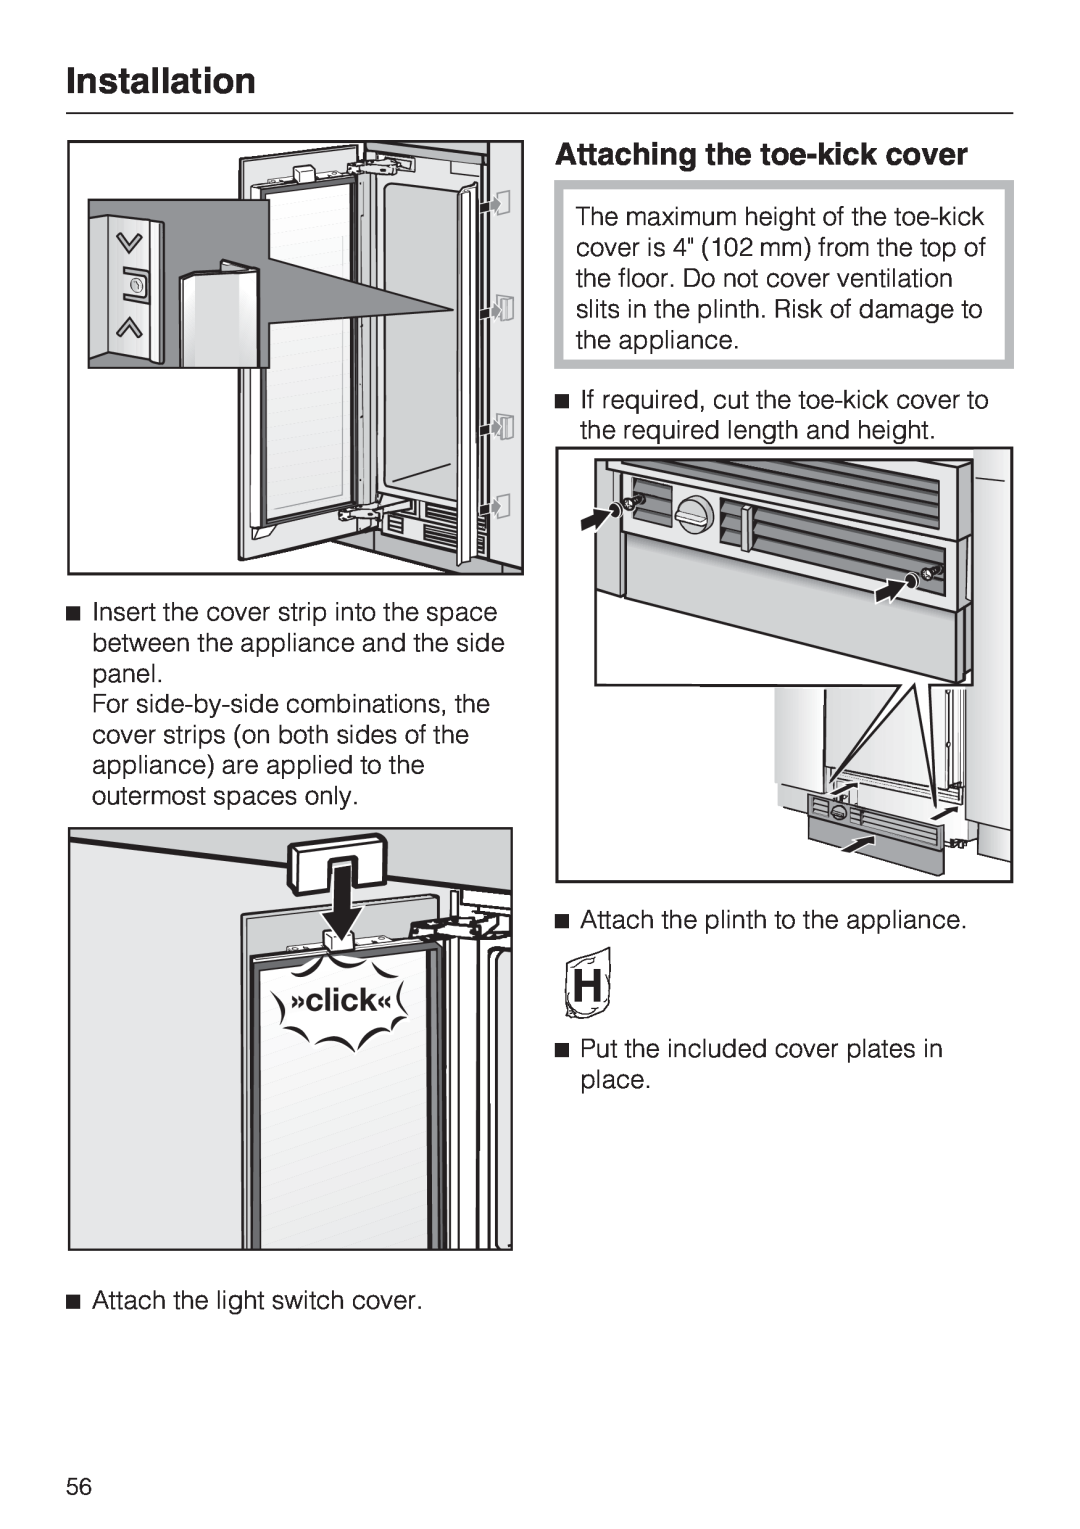 Miele KWT1611VI, KWT1601VI installation instructions Attaching the toe-kick cover, Installation 